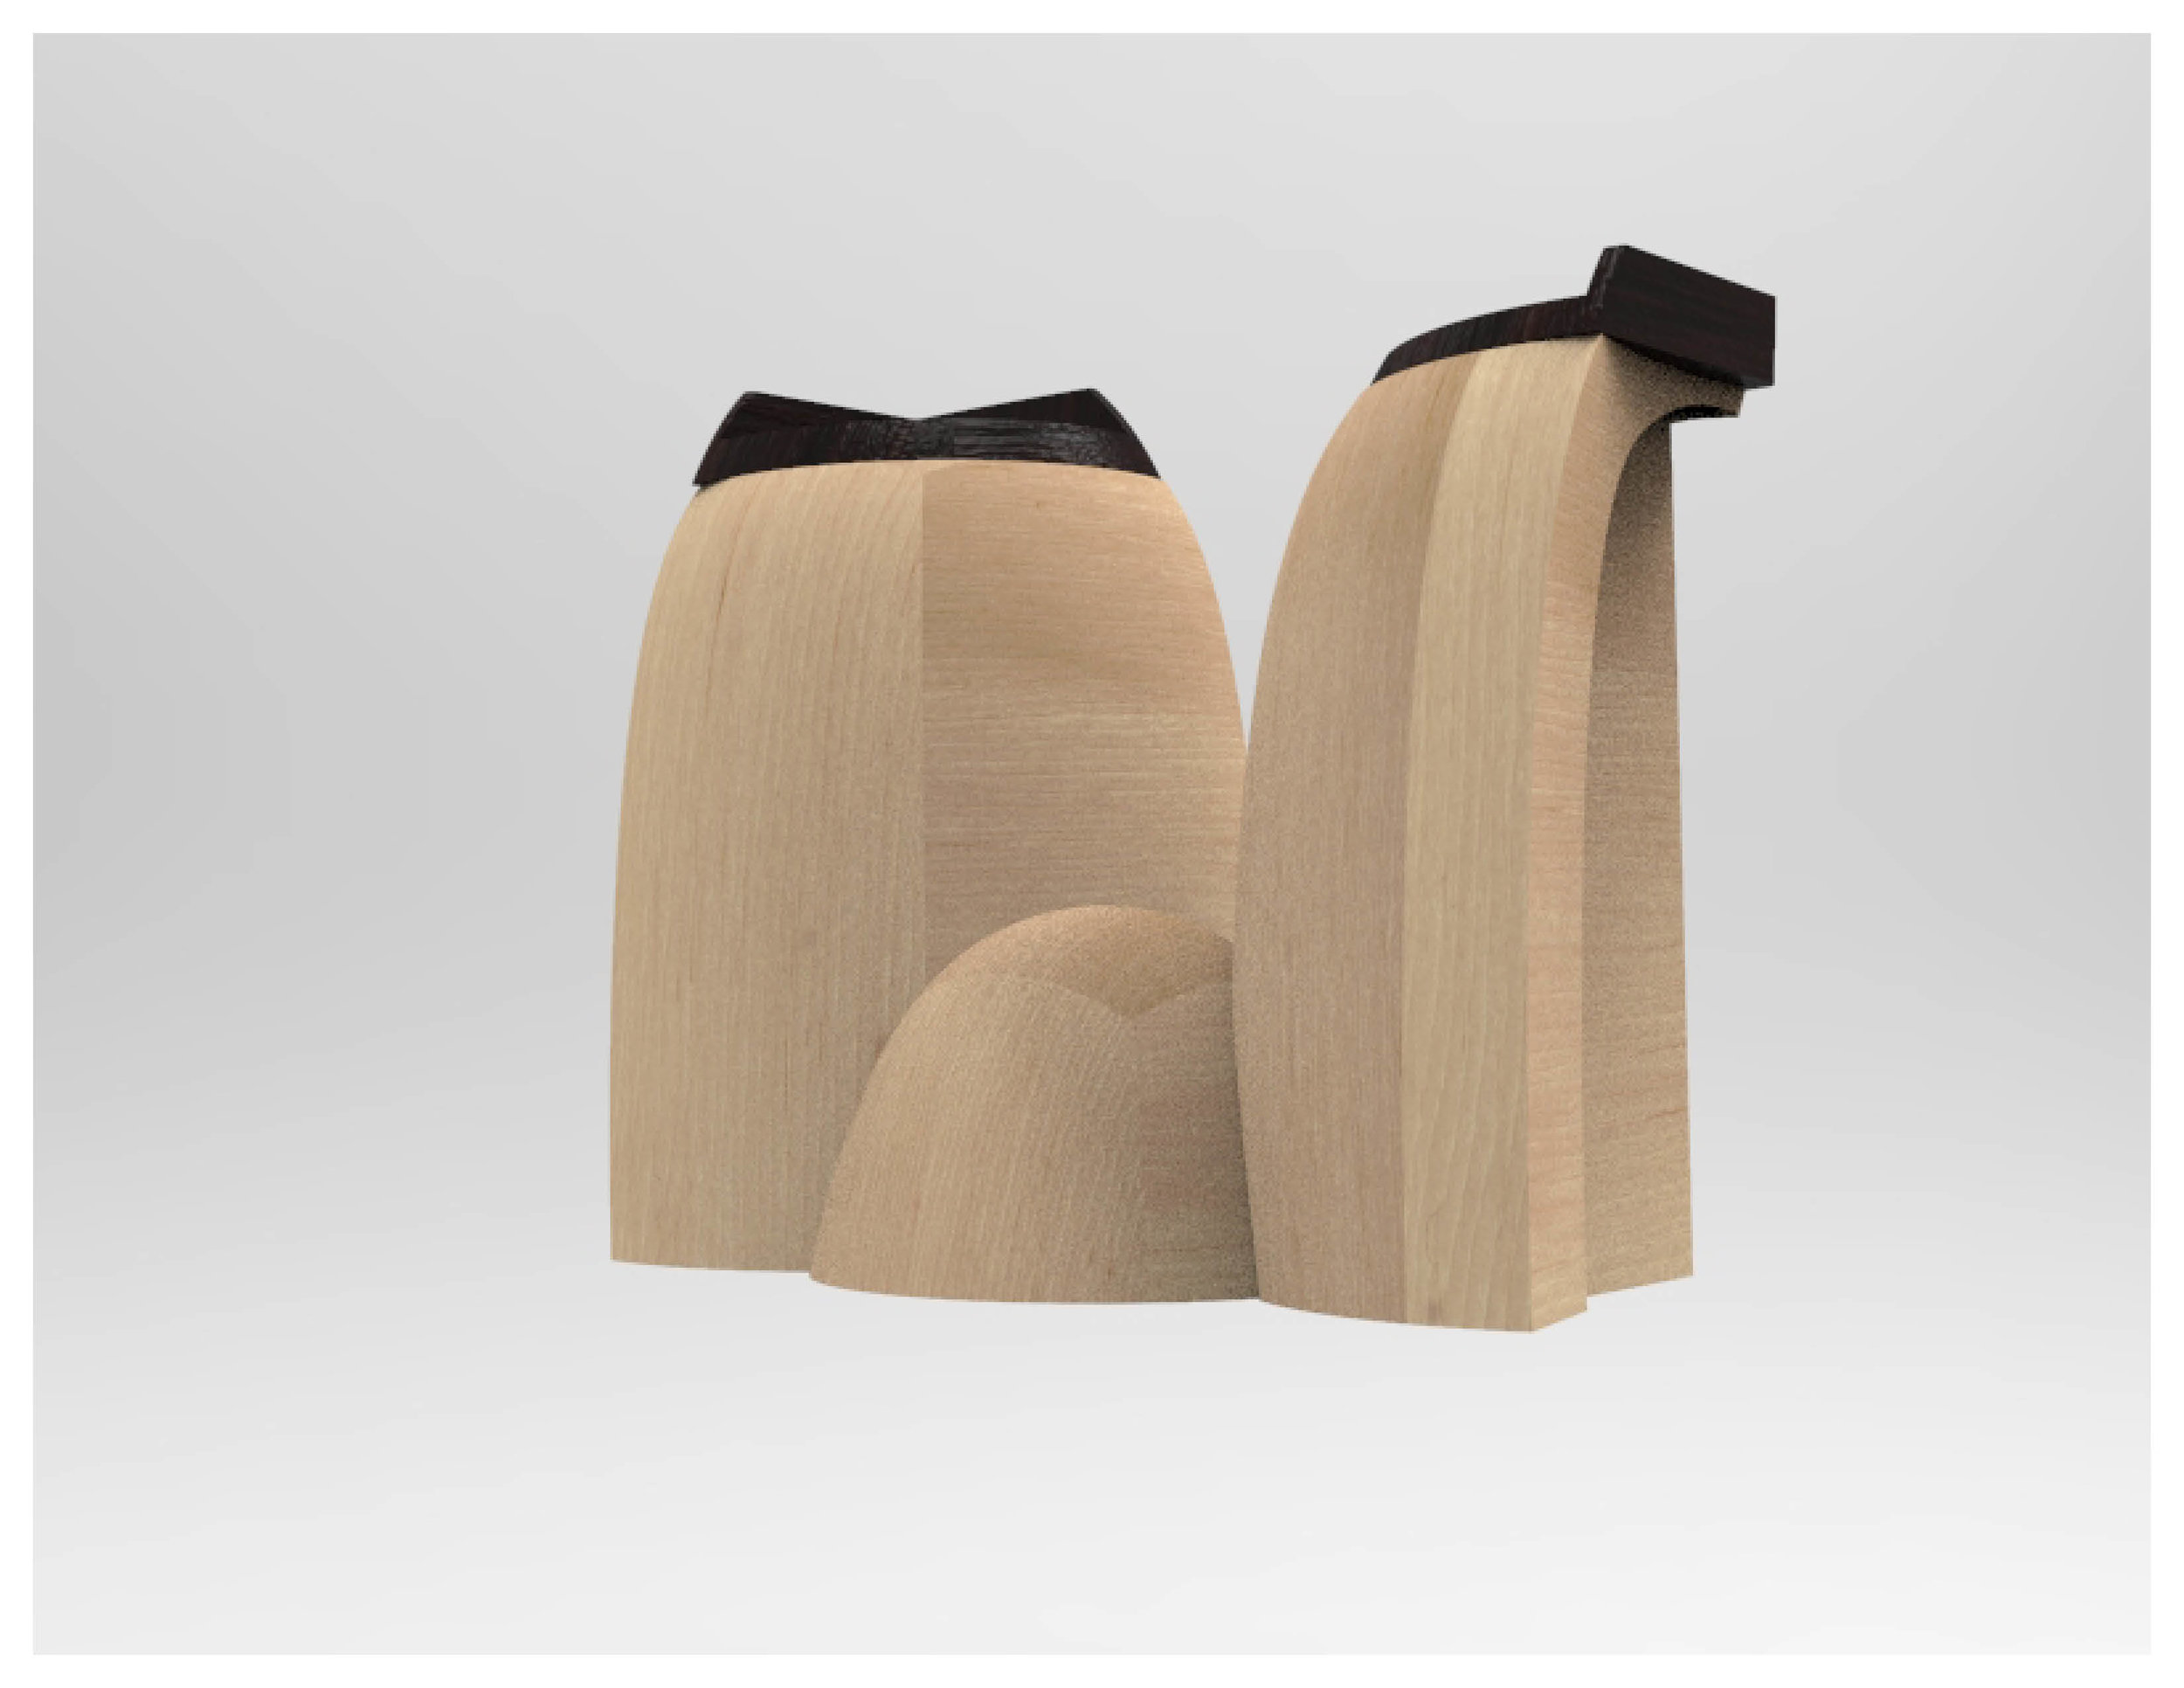 Stool Concept 3: Perspective View 3 (Constructed)